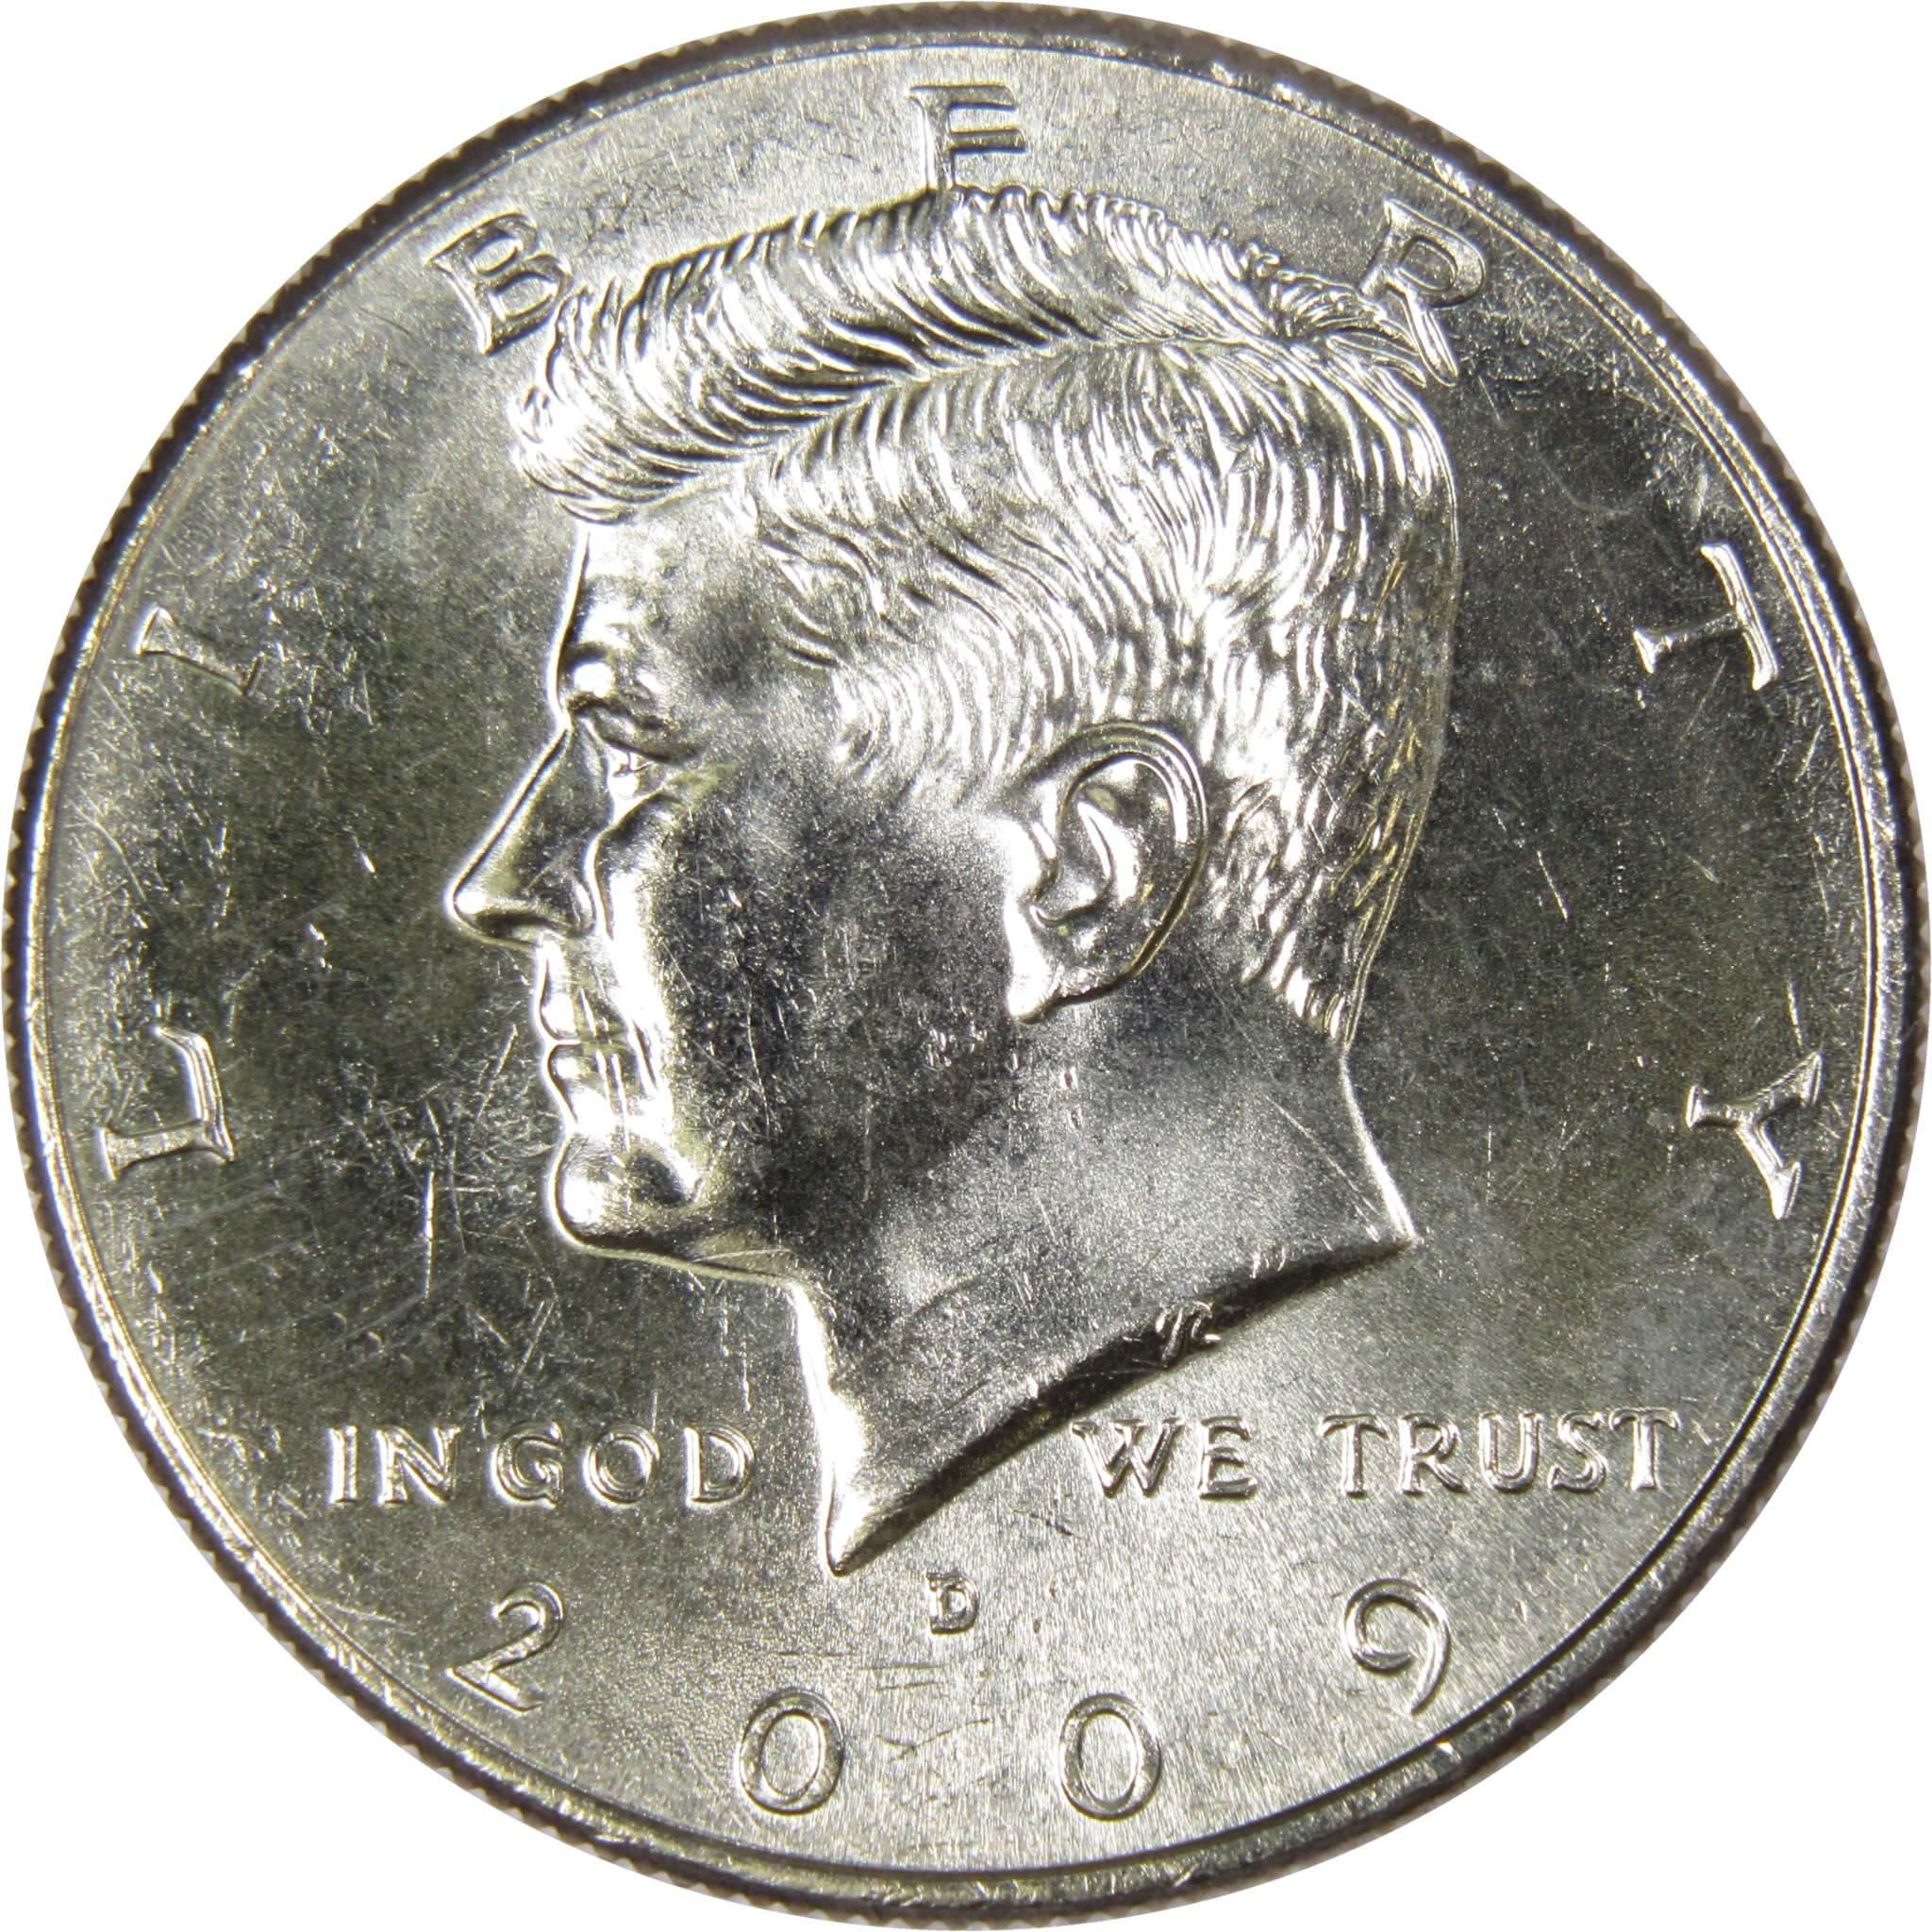 2009 D Kennedy Half Dollar BU Uncirculated Mint State 50c US Coin Collectible